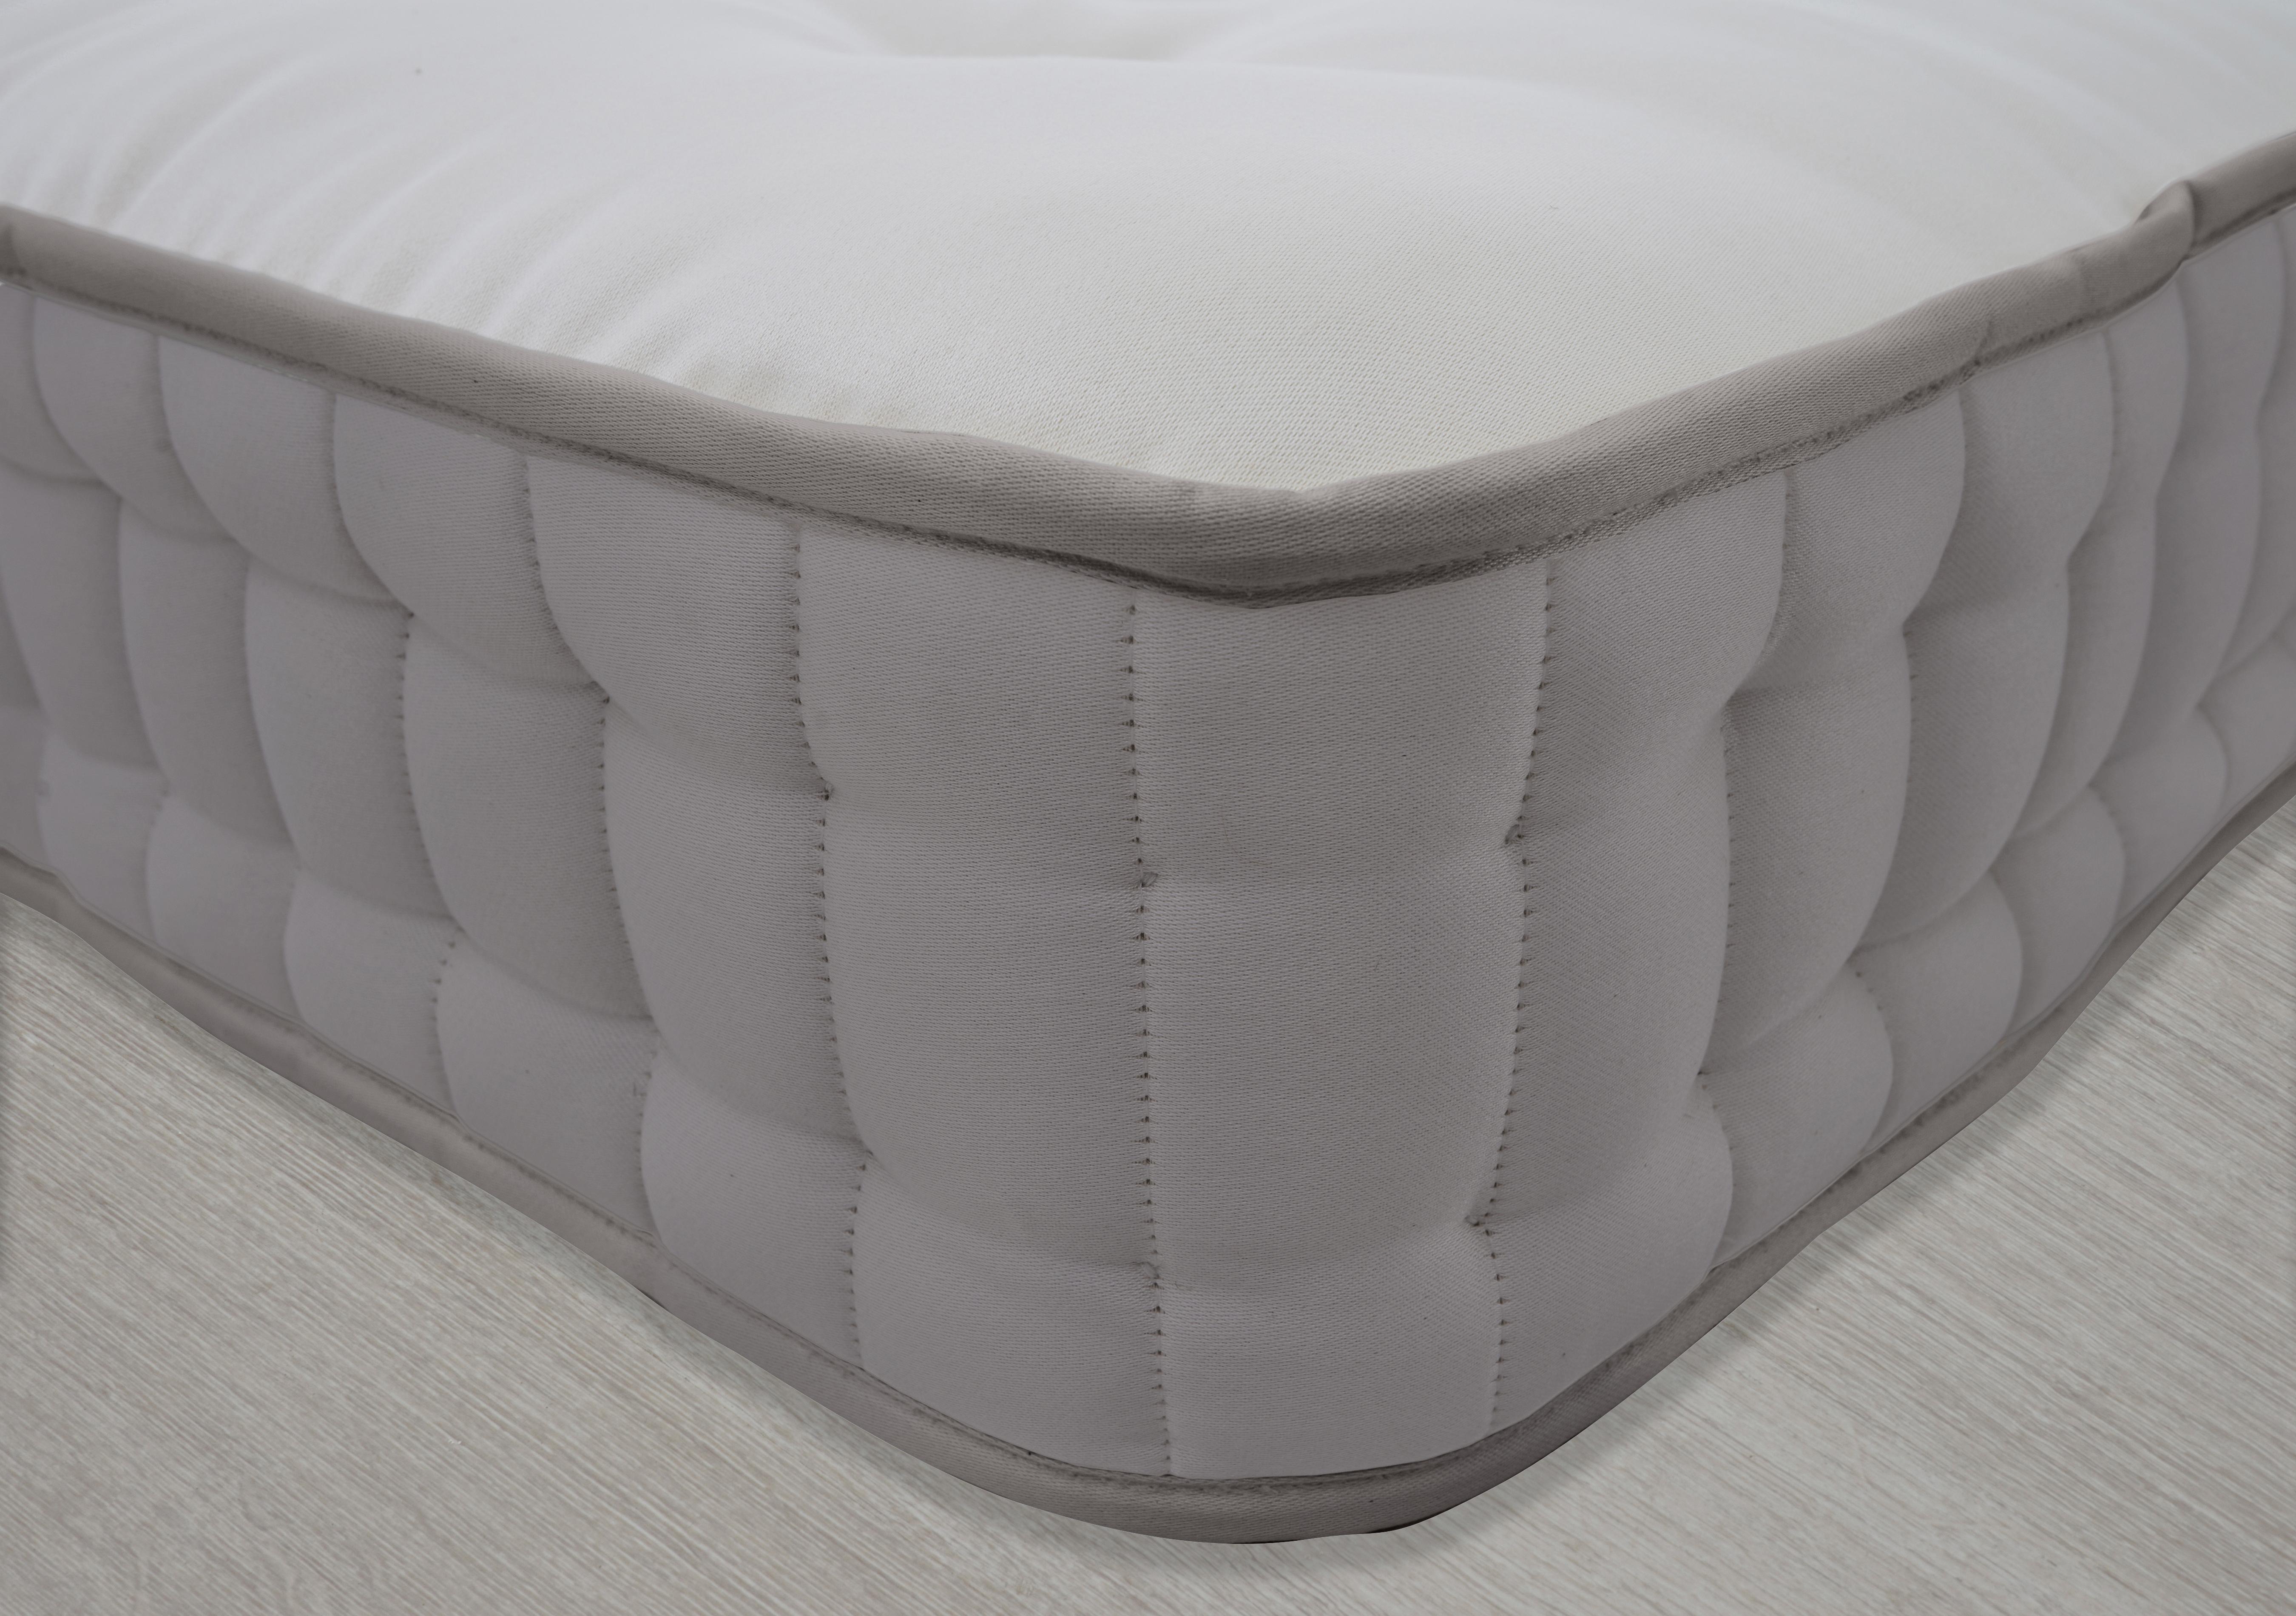 Yorkshire Ortho Mattress in  on Furniture Village